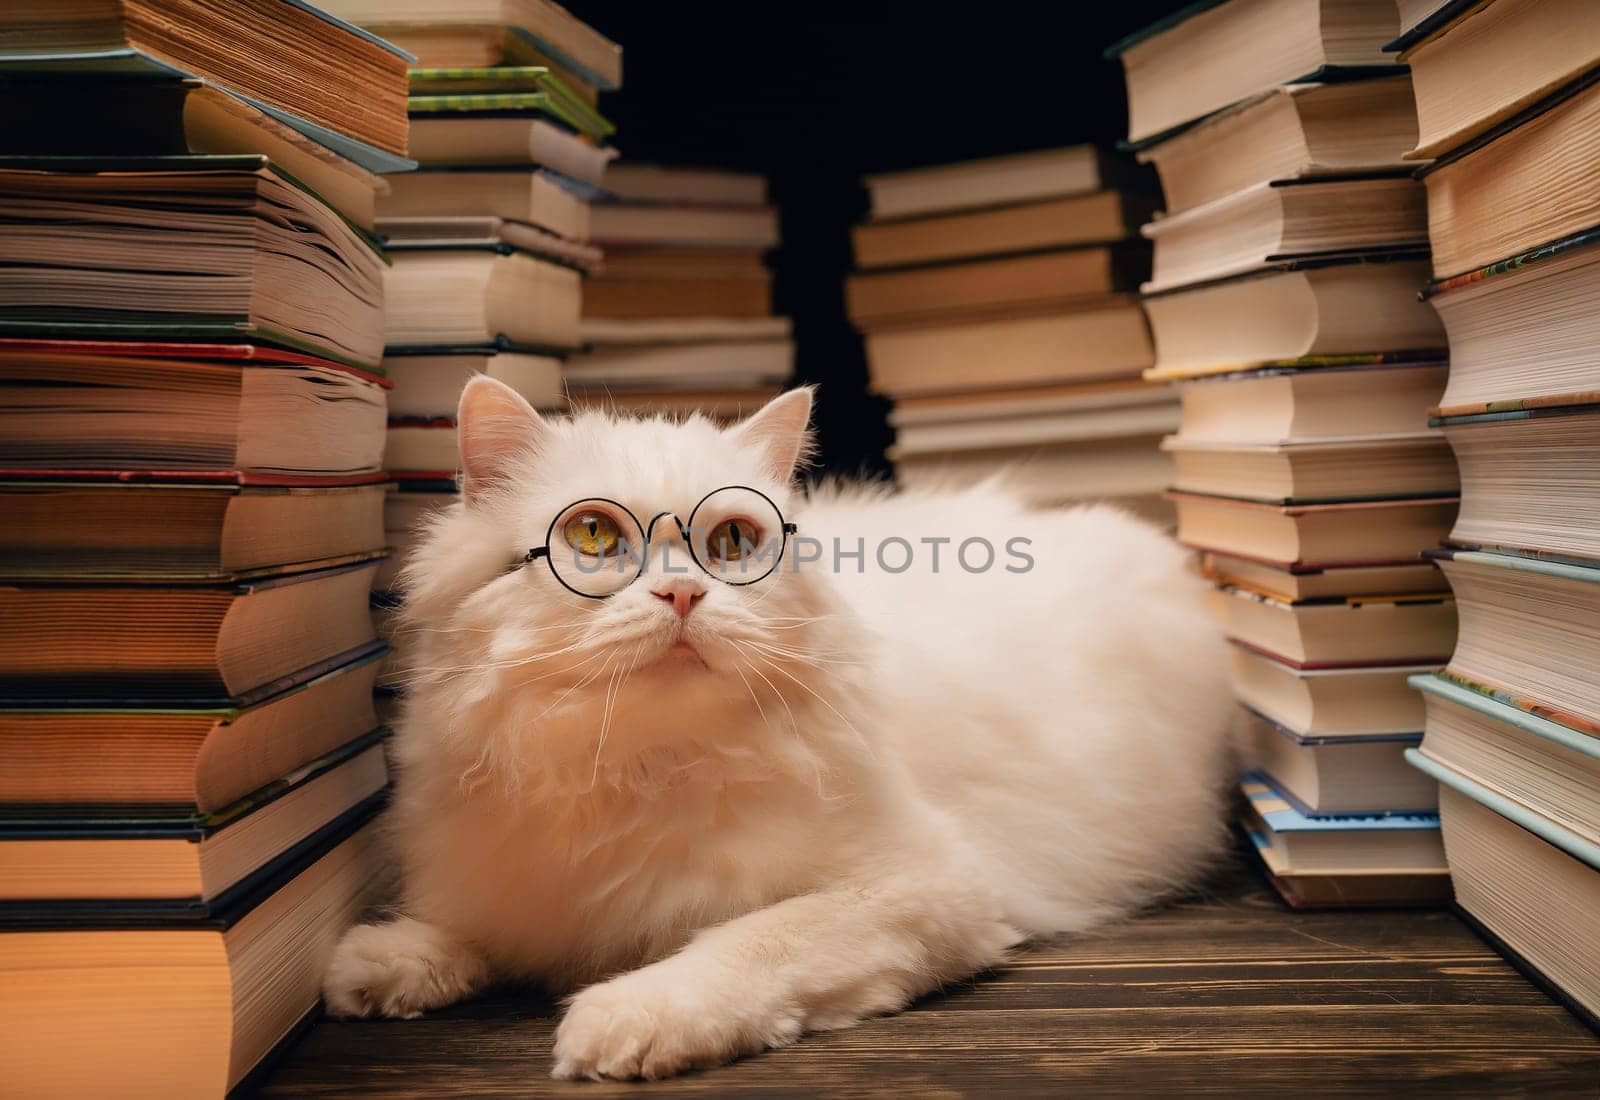 Portrait of fluffy cat in round glasses between books stacks in library. Domestic scientist kitty. Student pets, whisker in school. Smart animal. Education, science, knowledge concept. High quality